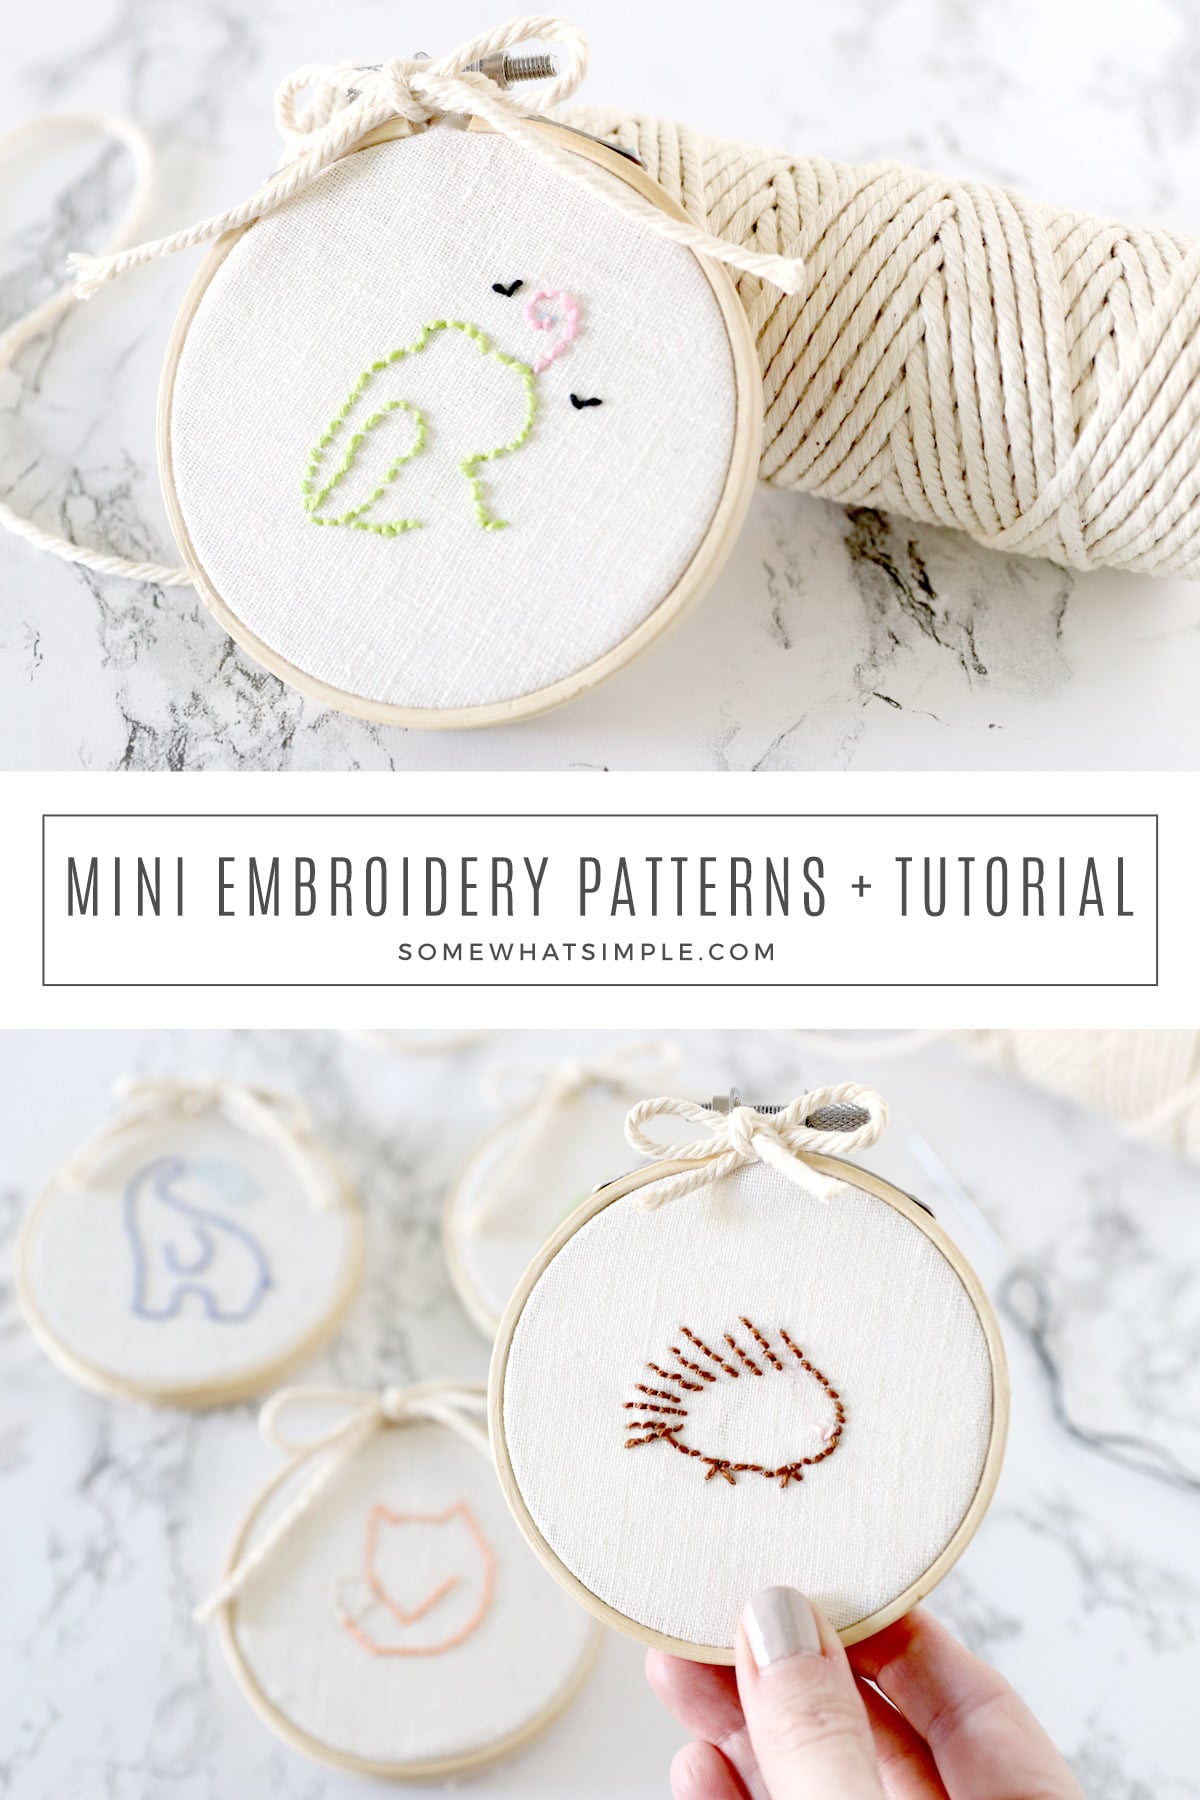 9 free patterns and instructions for simple embroidery designs that are absolutely perfect for kids and beginners. via @somewhatsimple